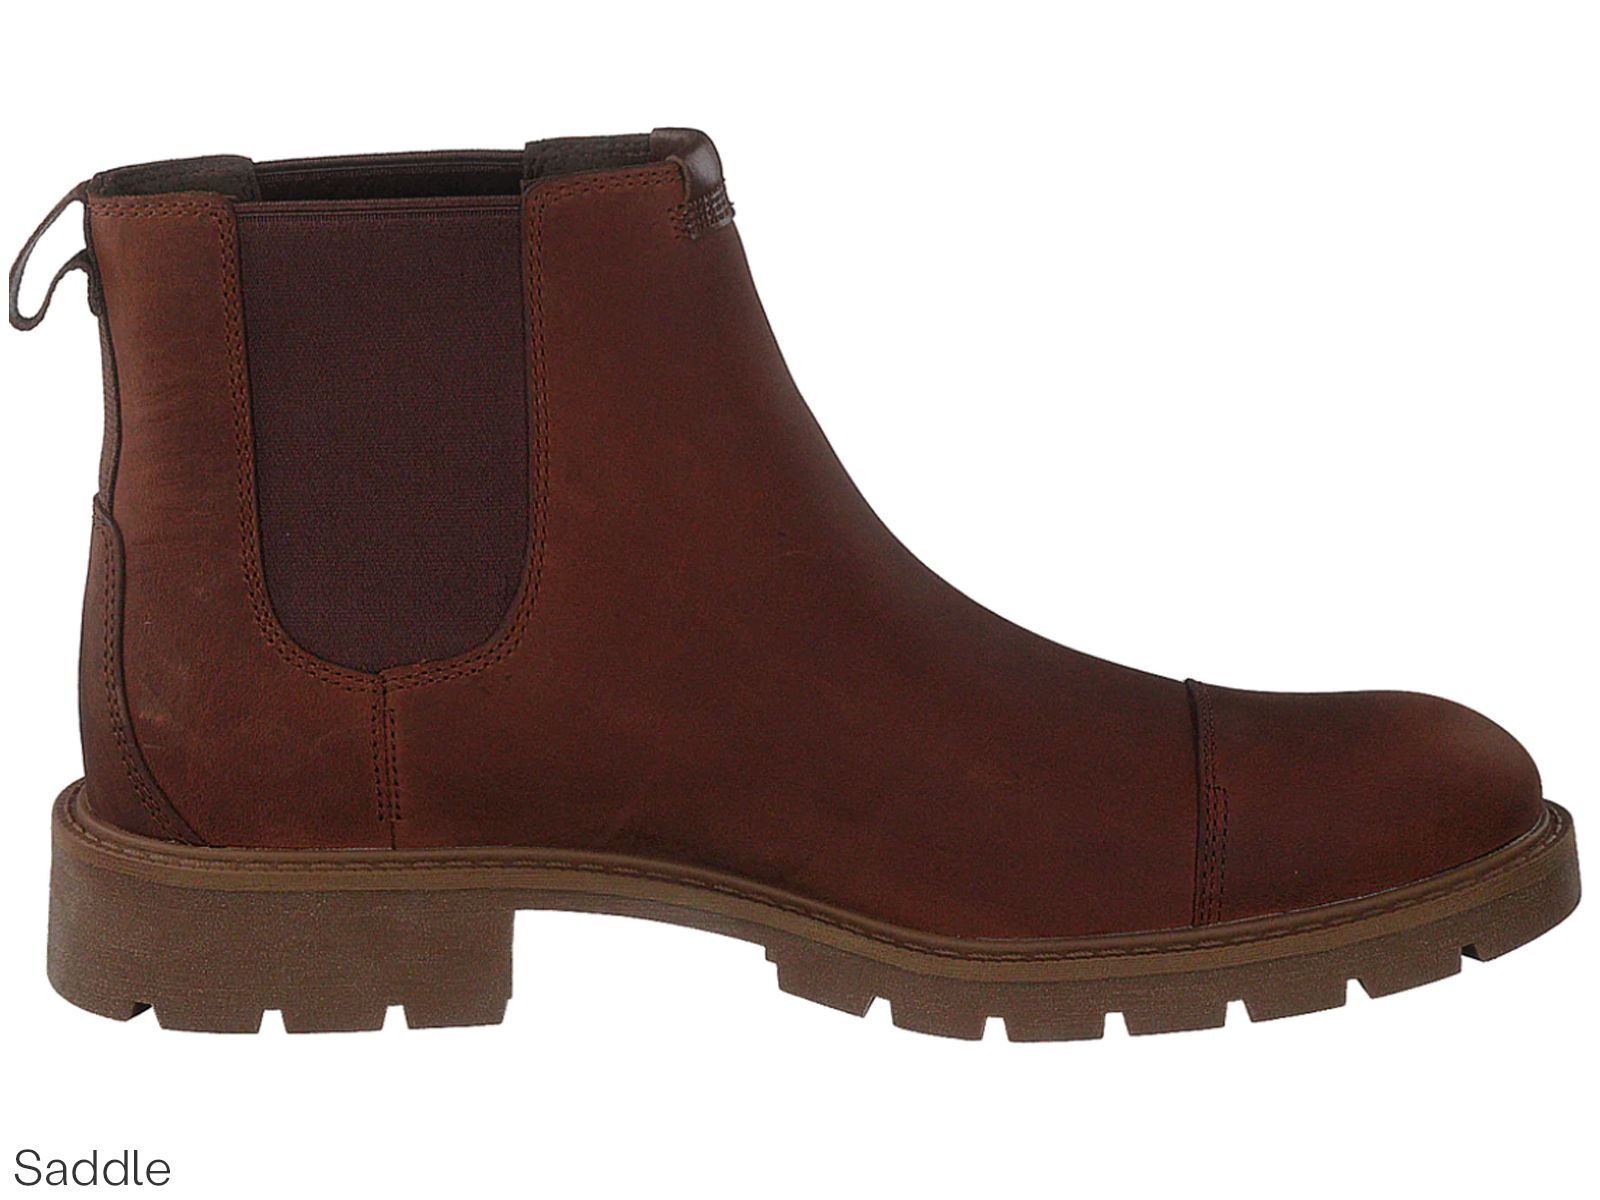 timberland-chelsea-boots